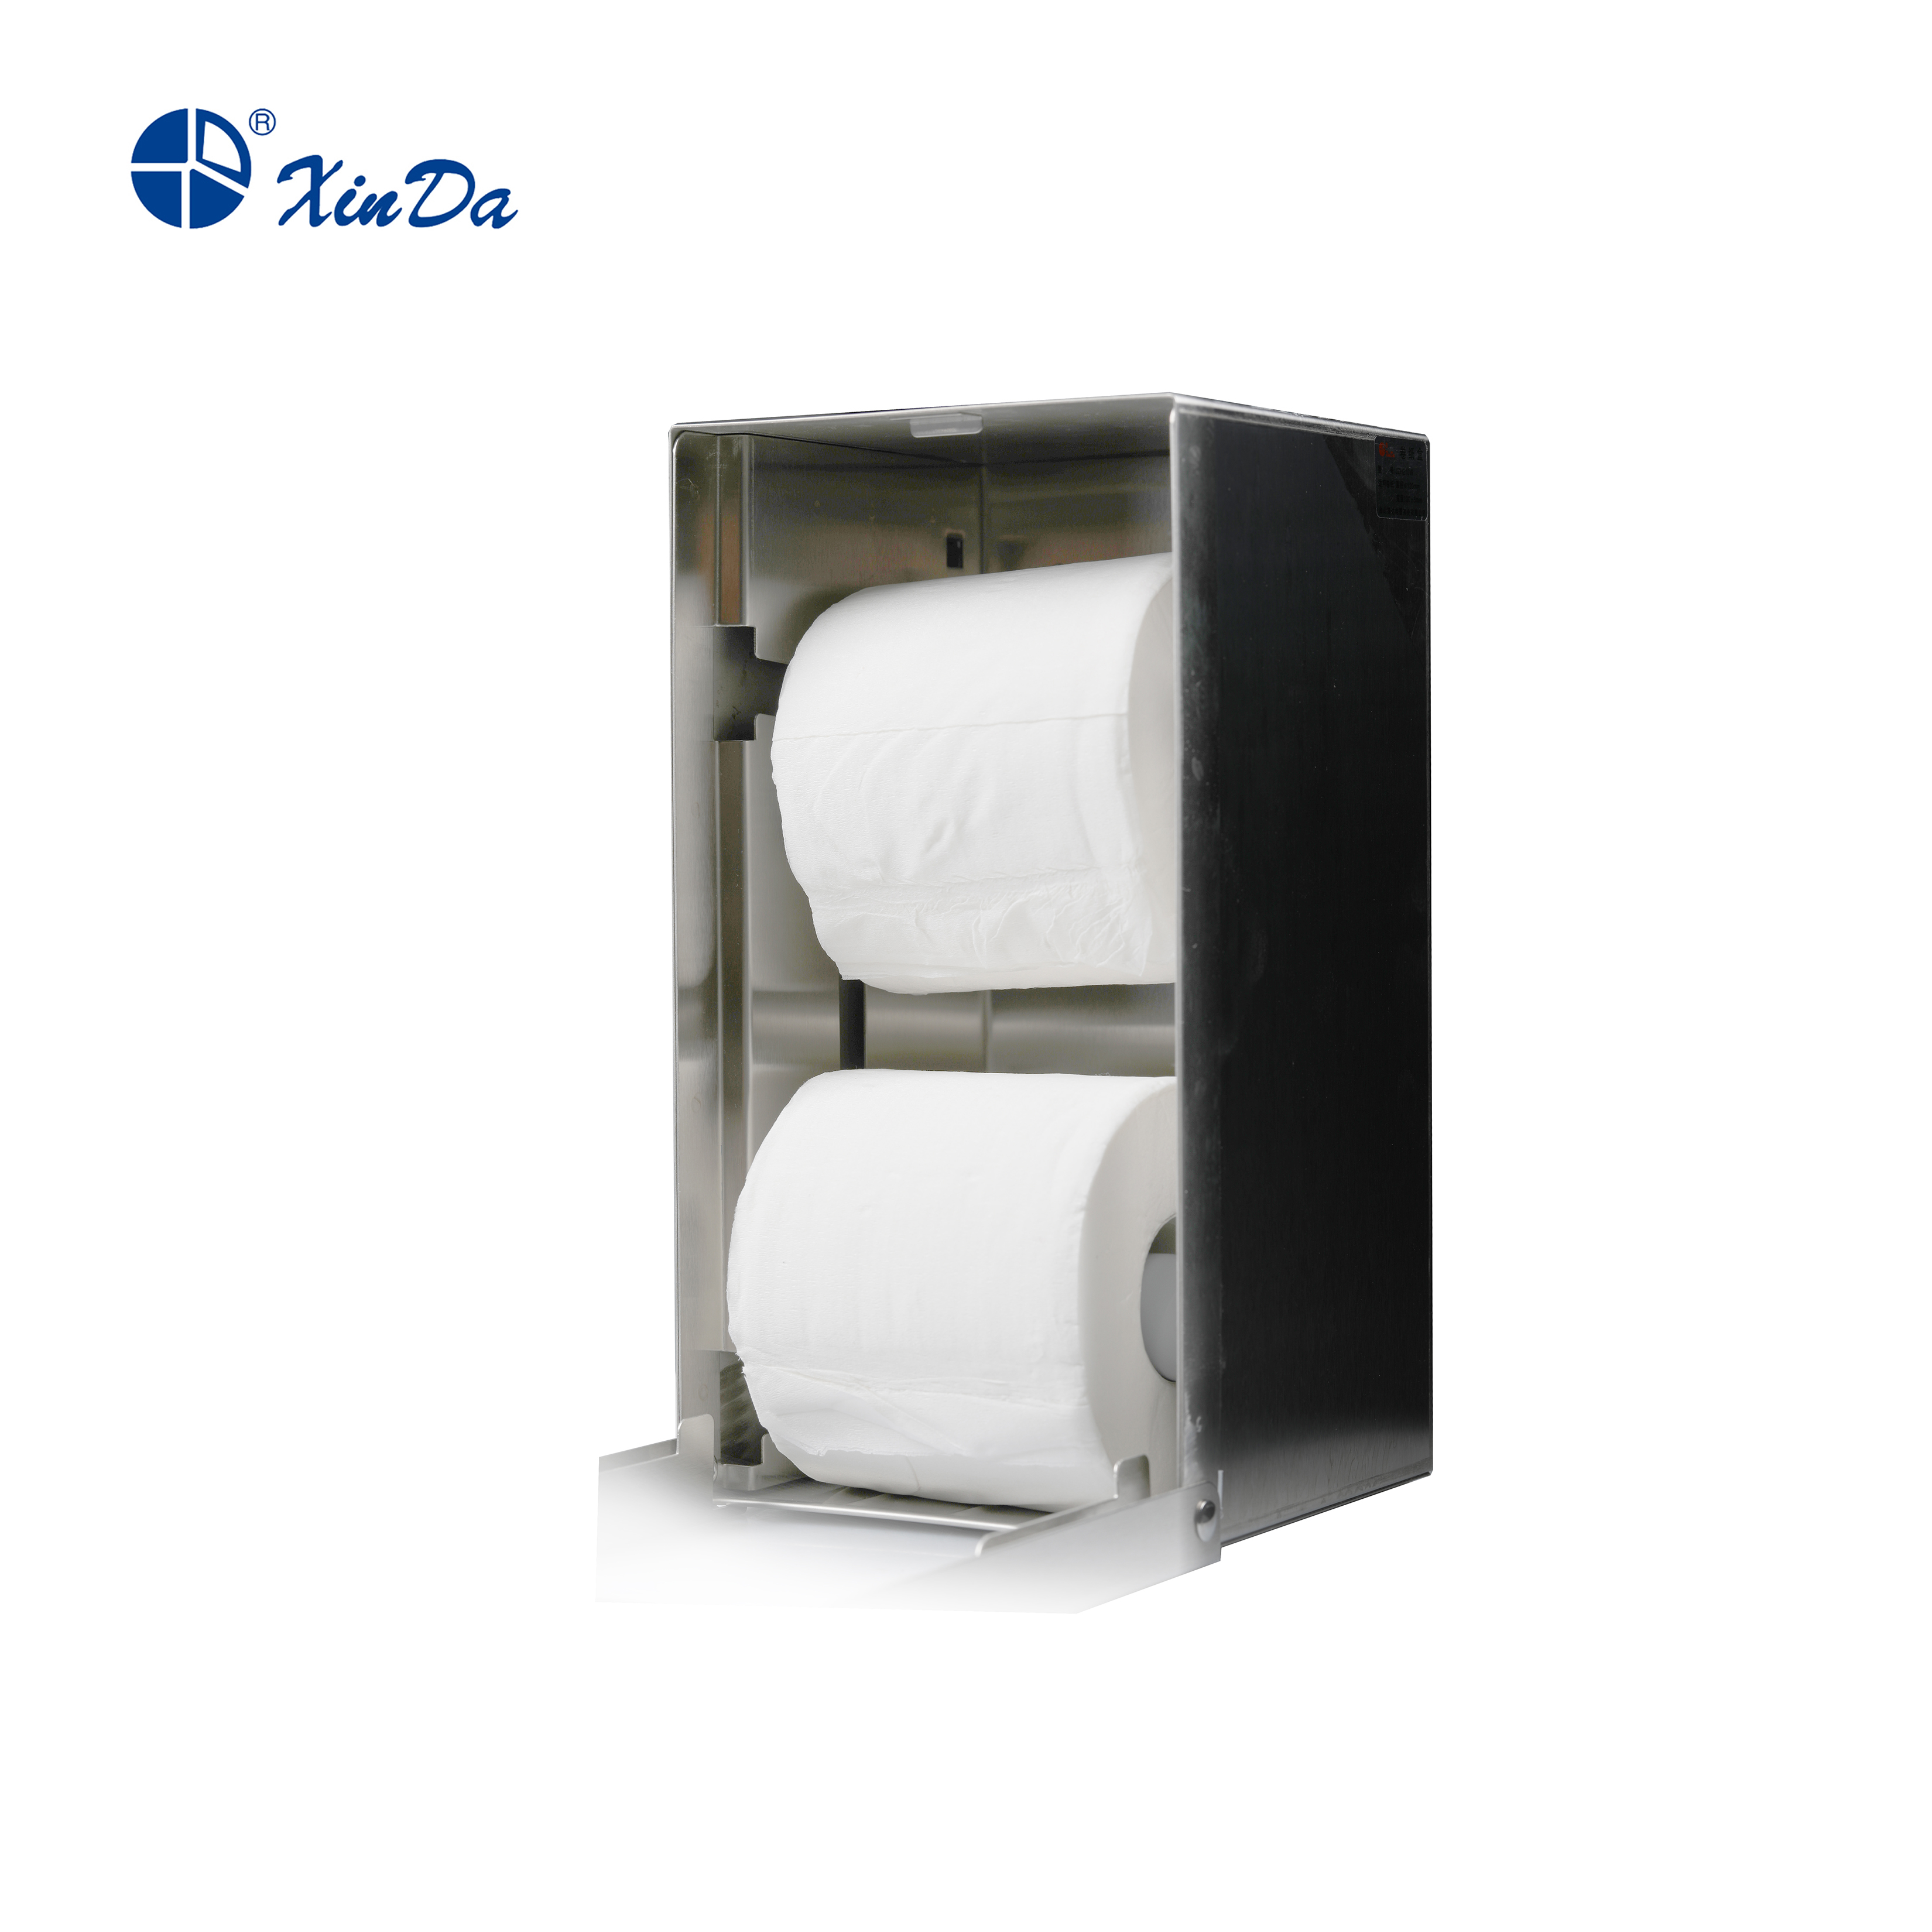 Large capacity Stainless Steel Tissue Box